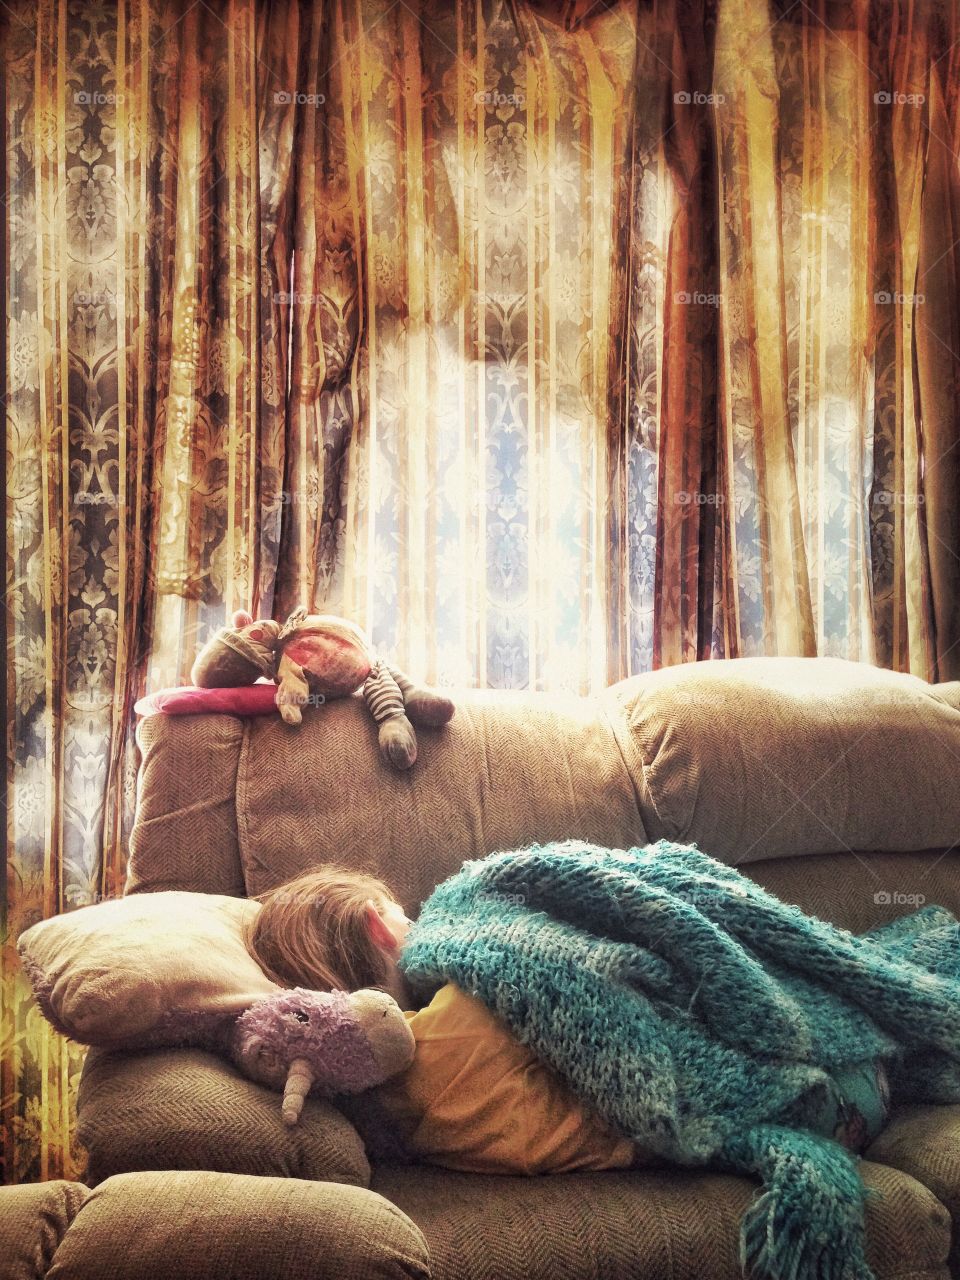 Morning Slumber.

Young girl sleeping on a couch with morning light shining through patterned curtains.